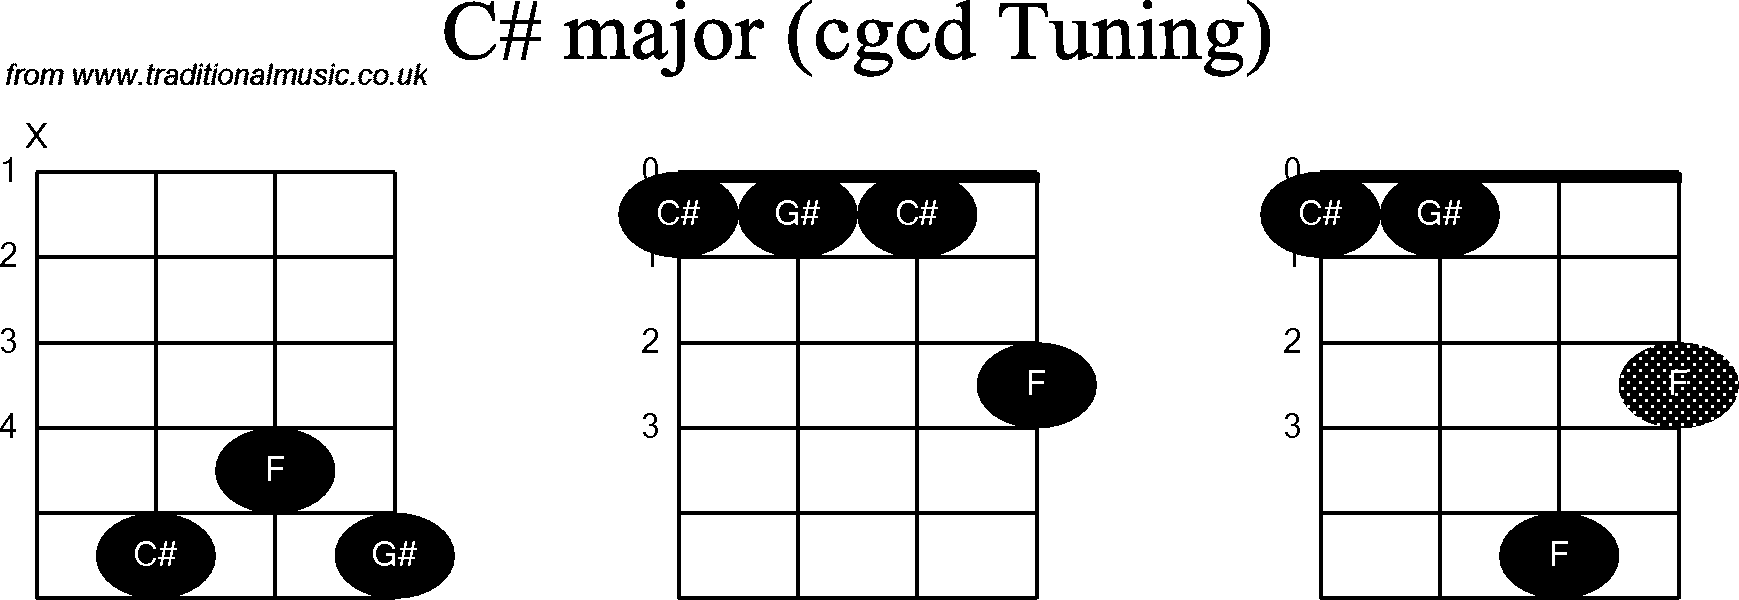 Chord diagrams for Banjo(Double C) C#